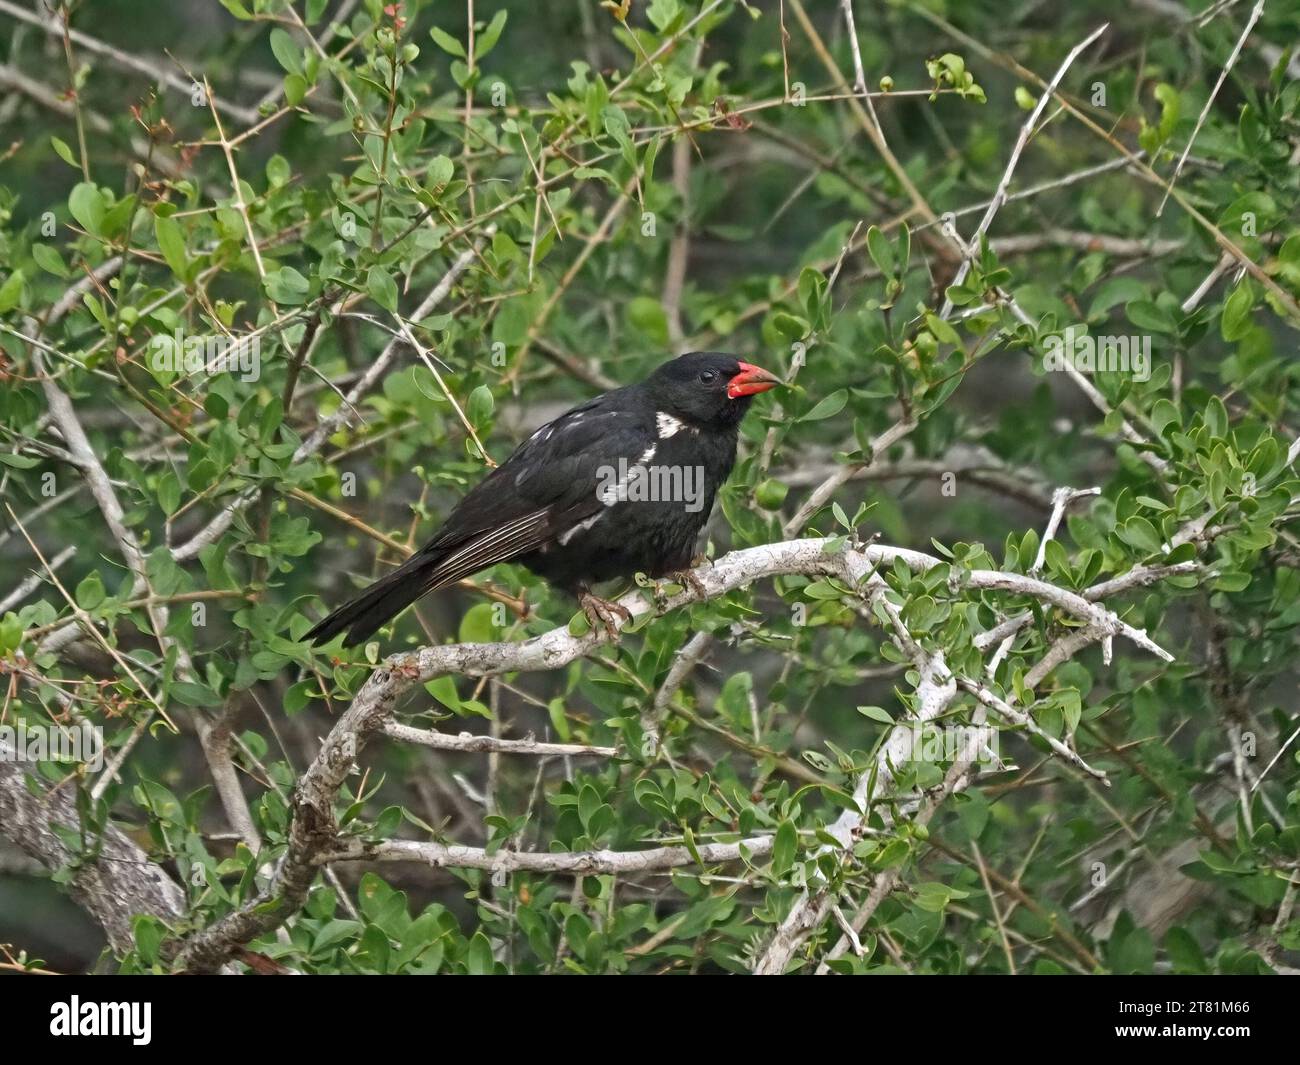 male Red-billed Buffalo Weaver (Bubalornis niger) perched in dense tree thicket Galana ,Kenya,Africa Stock Photo